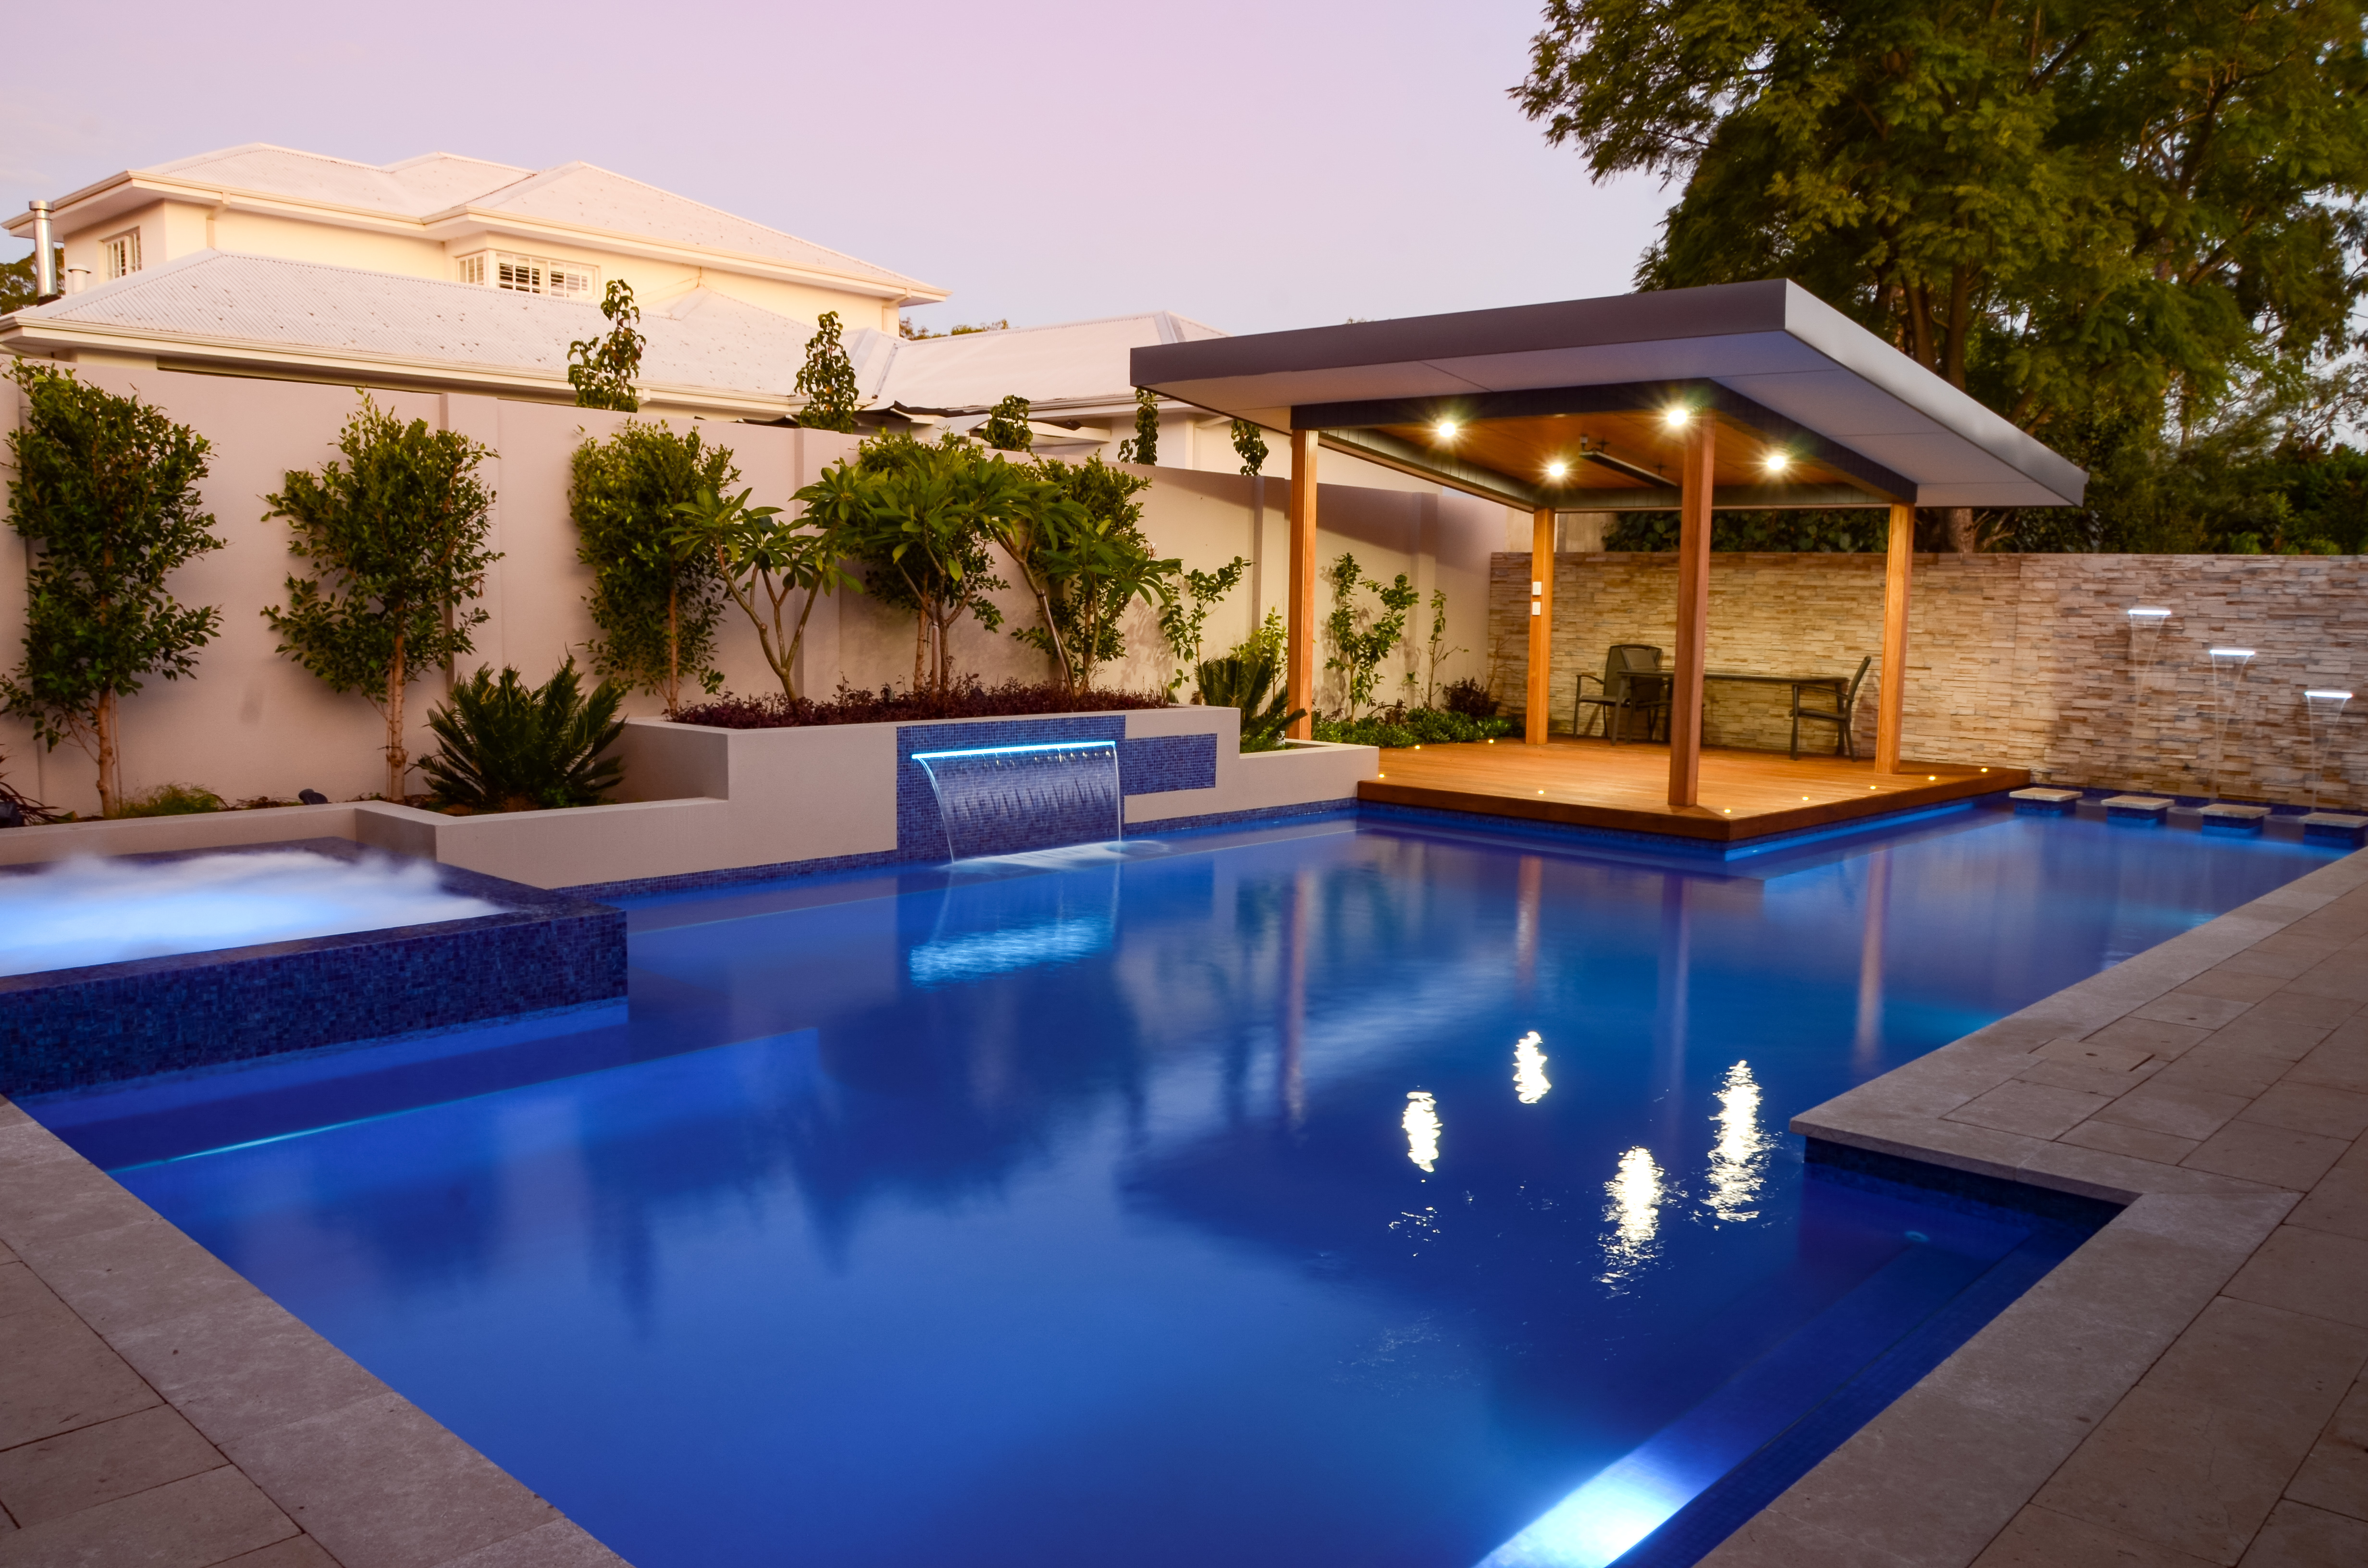 Swimming Pool Builders In Perth, Concrete Above Ground Pools Perth